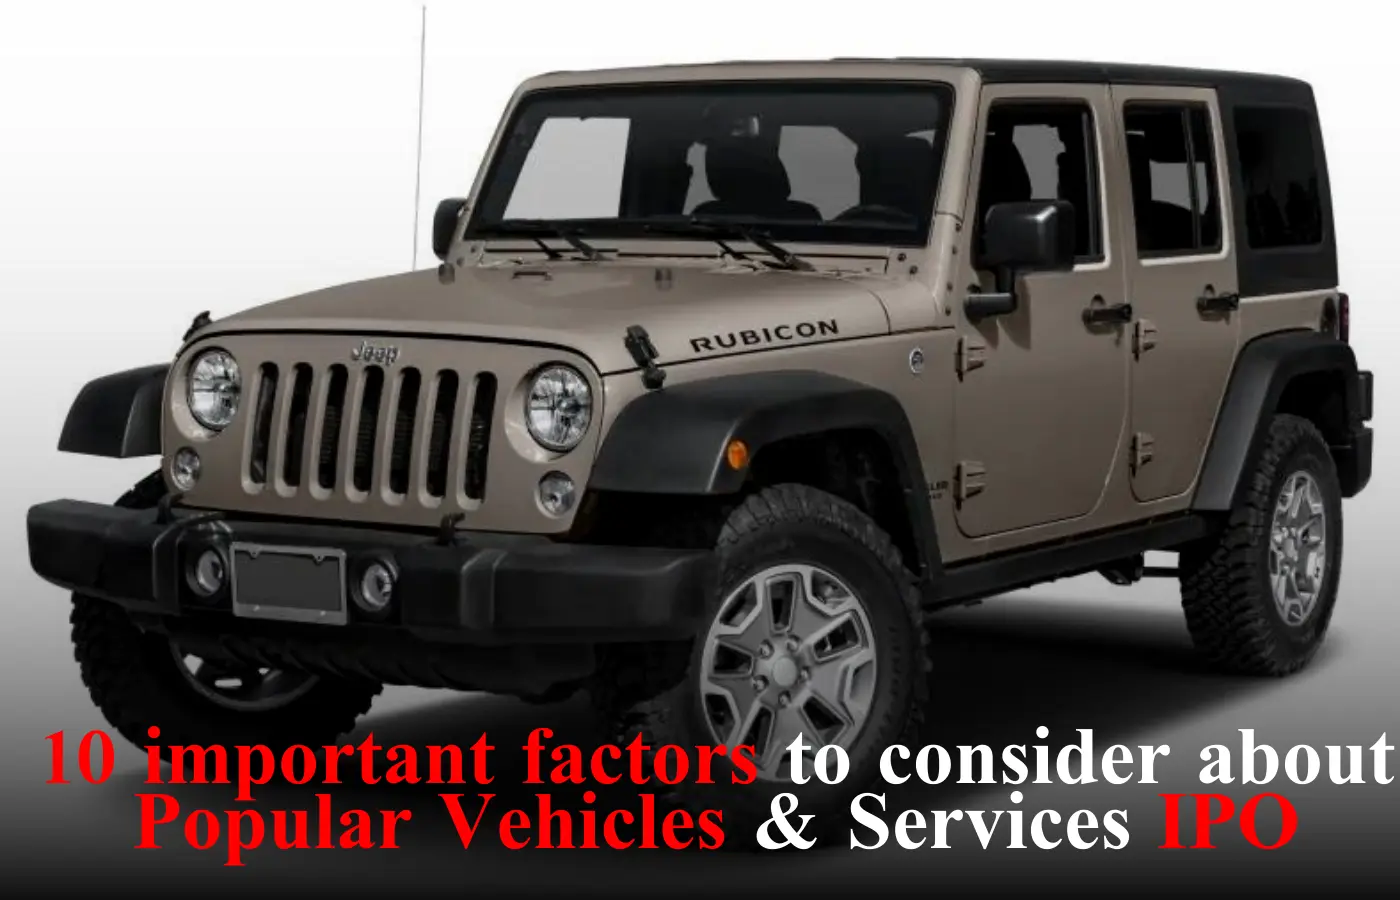 10 important factors to consider about Popular Vehicles & Services IPO